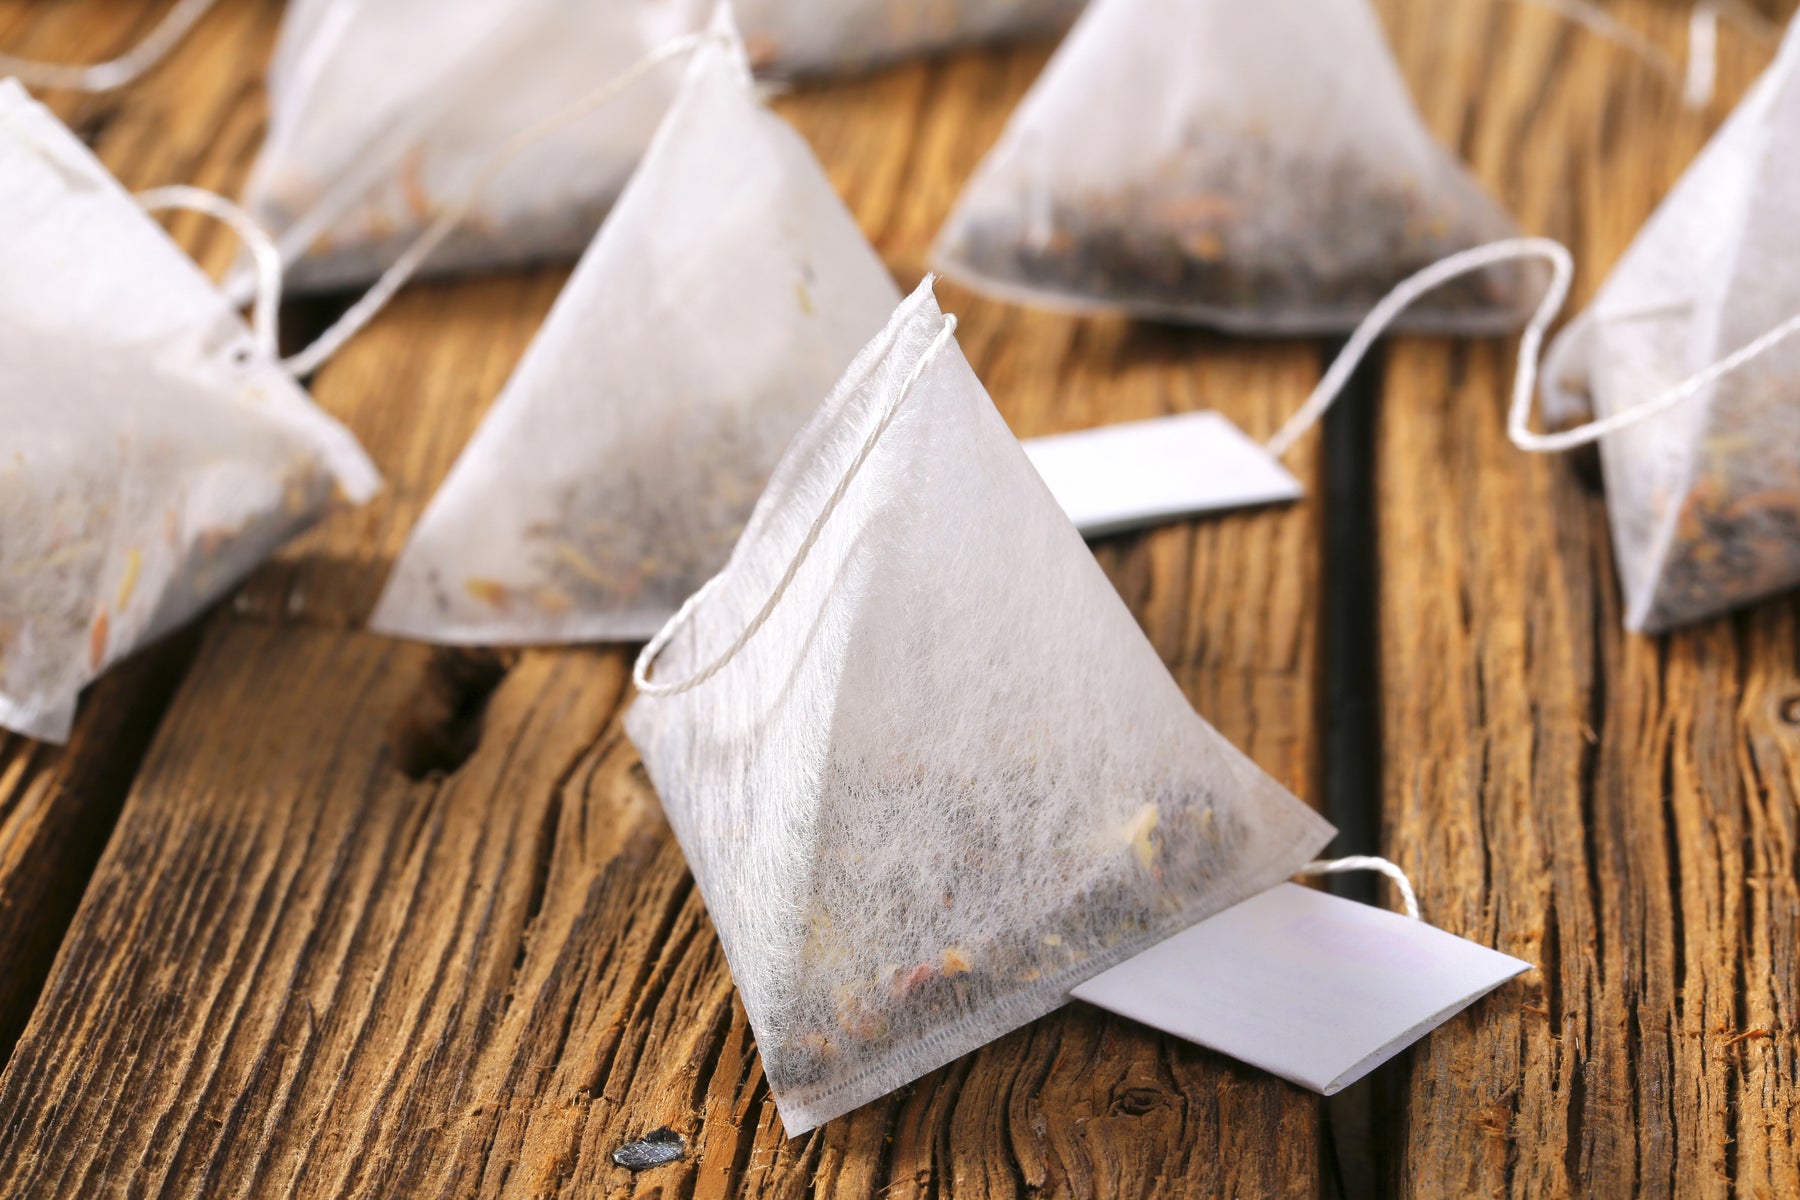 HOW TO REUSE YOUR INFUSED TEA BAGS